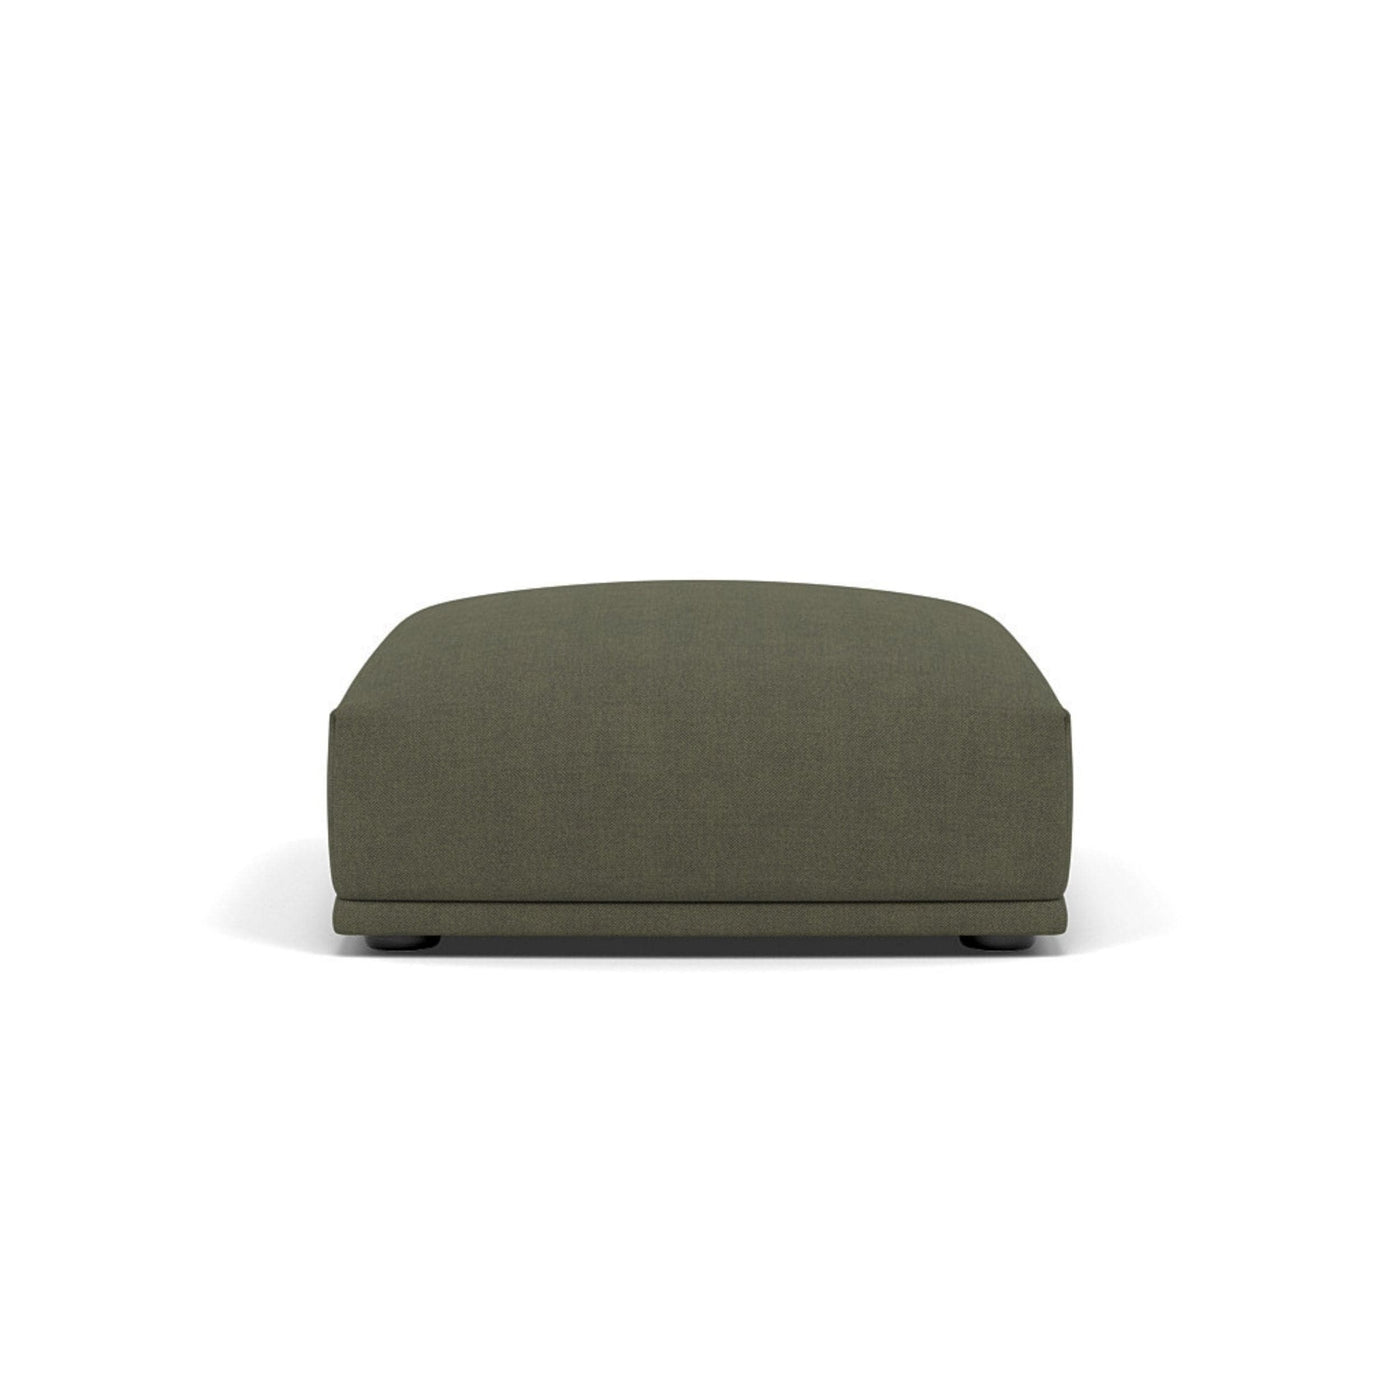 Muuto Connect Modular Sofa System, module i, short ottoman, fiord 961 fabric. Available from someday designs. #colour_fiord-961